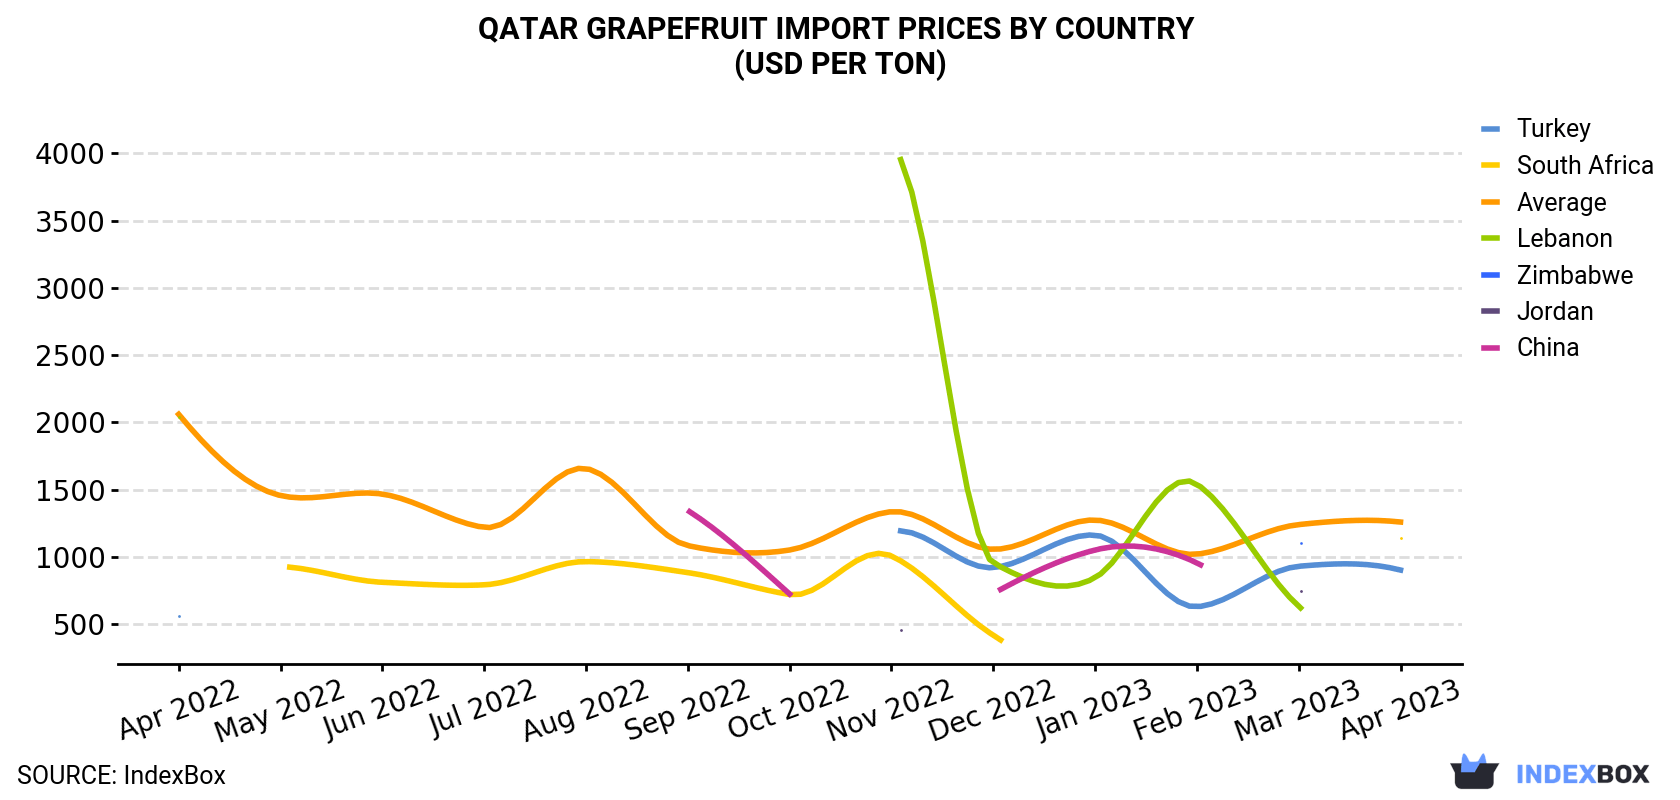 Qatar Grapefruit Import Prices By Country (USD Per Ton)